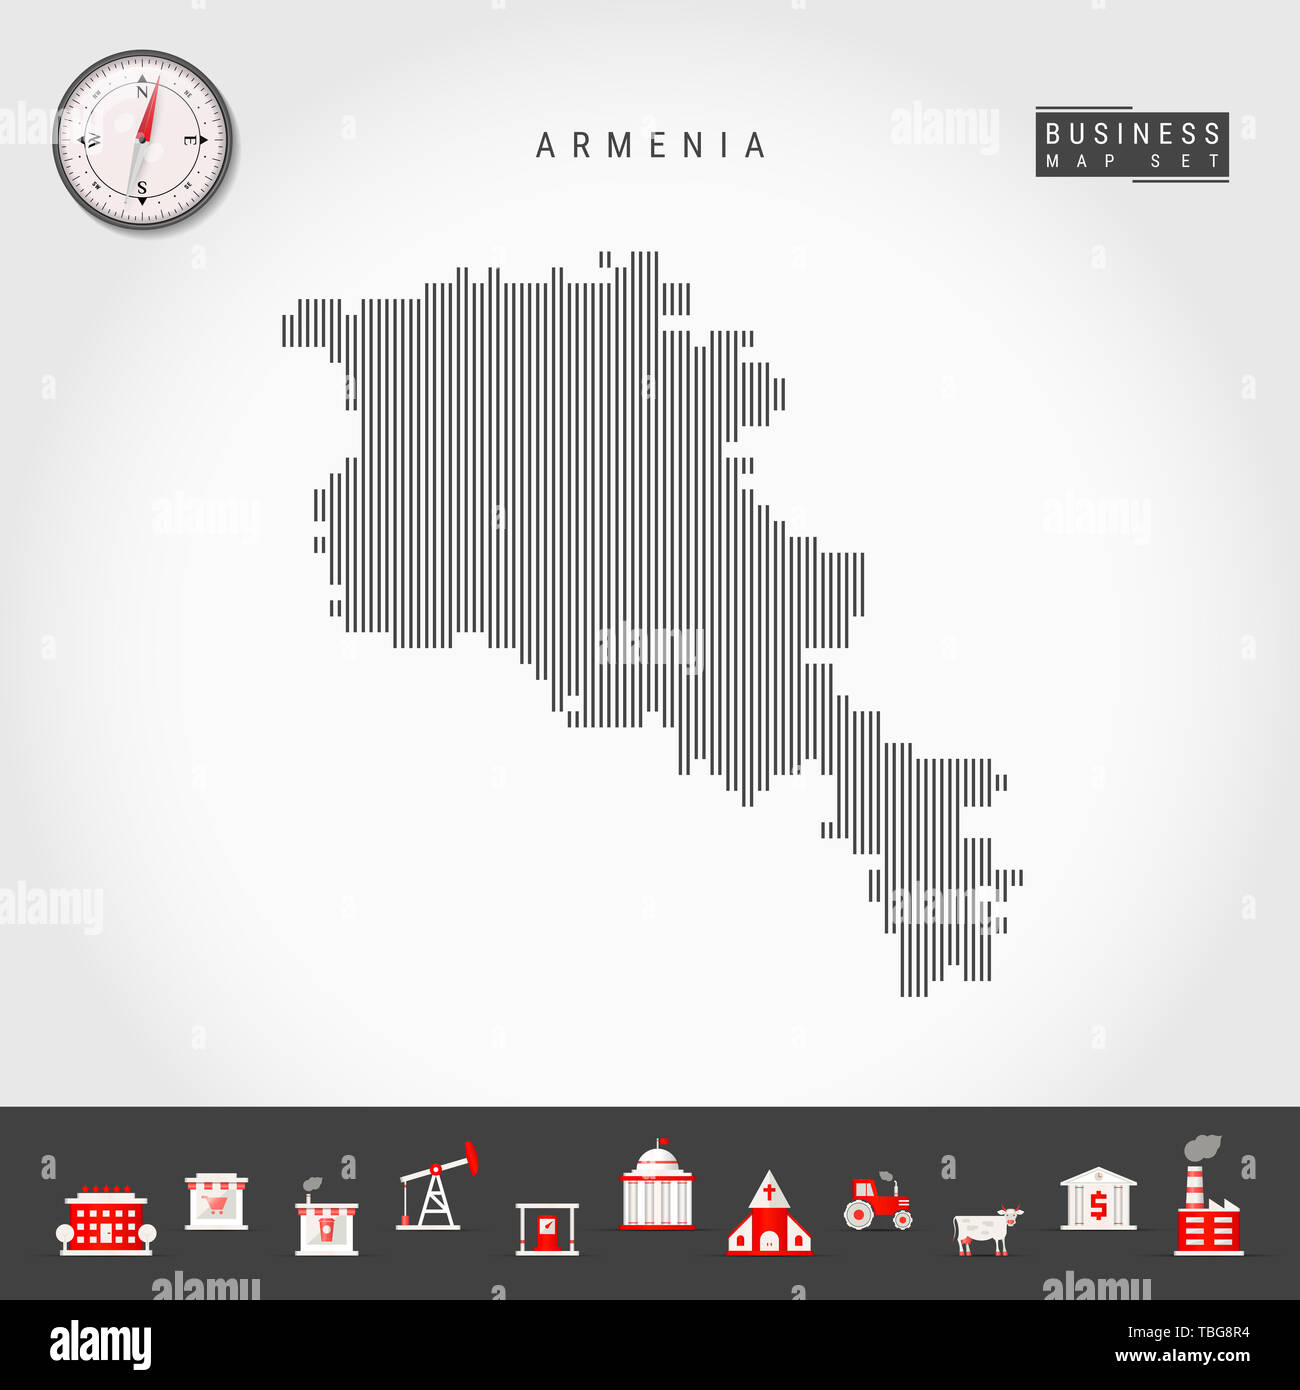 Vertical Lines Pattern Map of Armenia. Striped Simple Silhouette of Armenia. Realistic Compass. Business Infographic Icons. Stock Photo